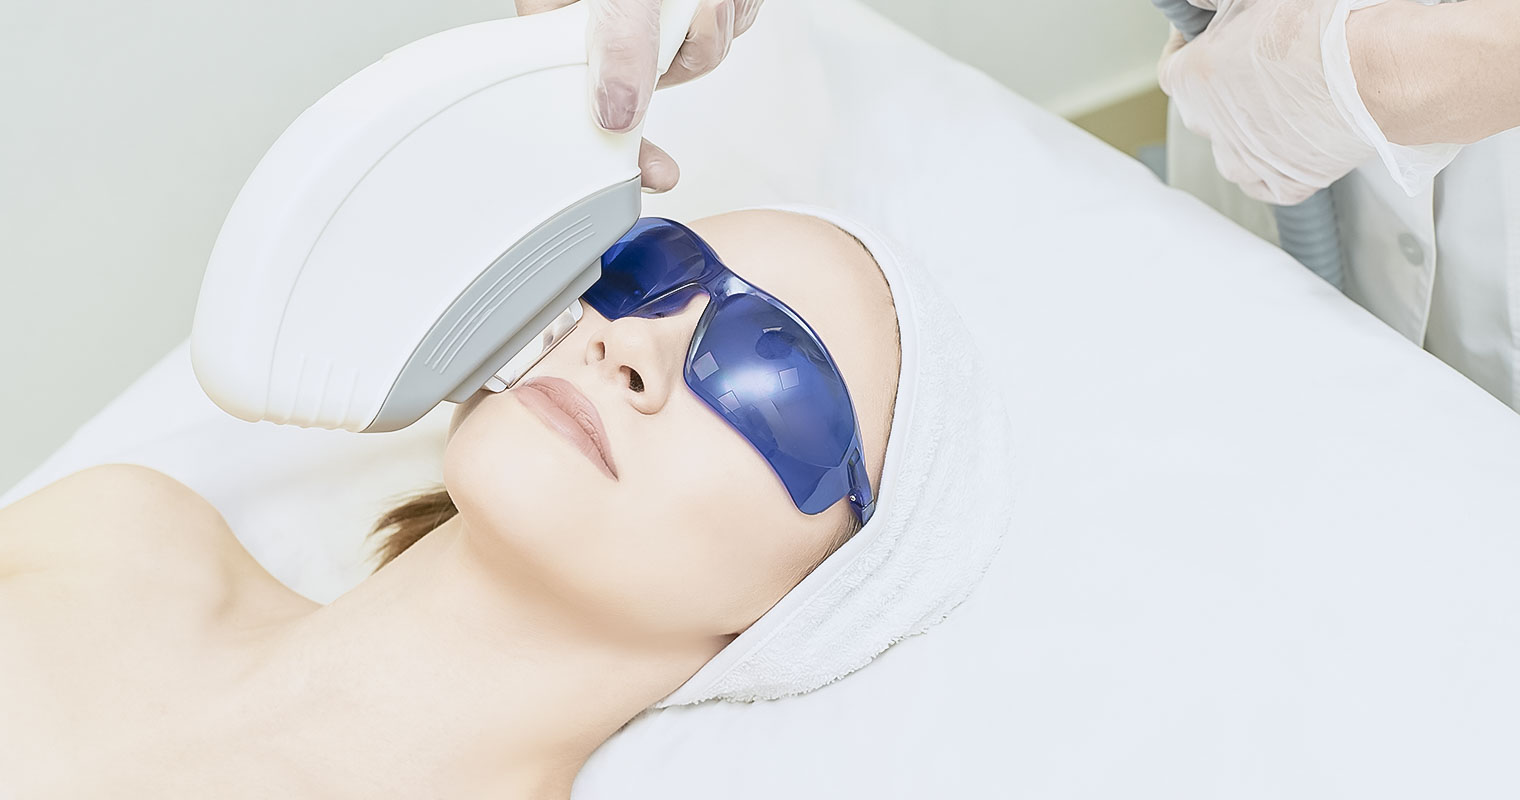 Woman going through laser treatment for the face